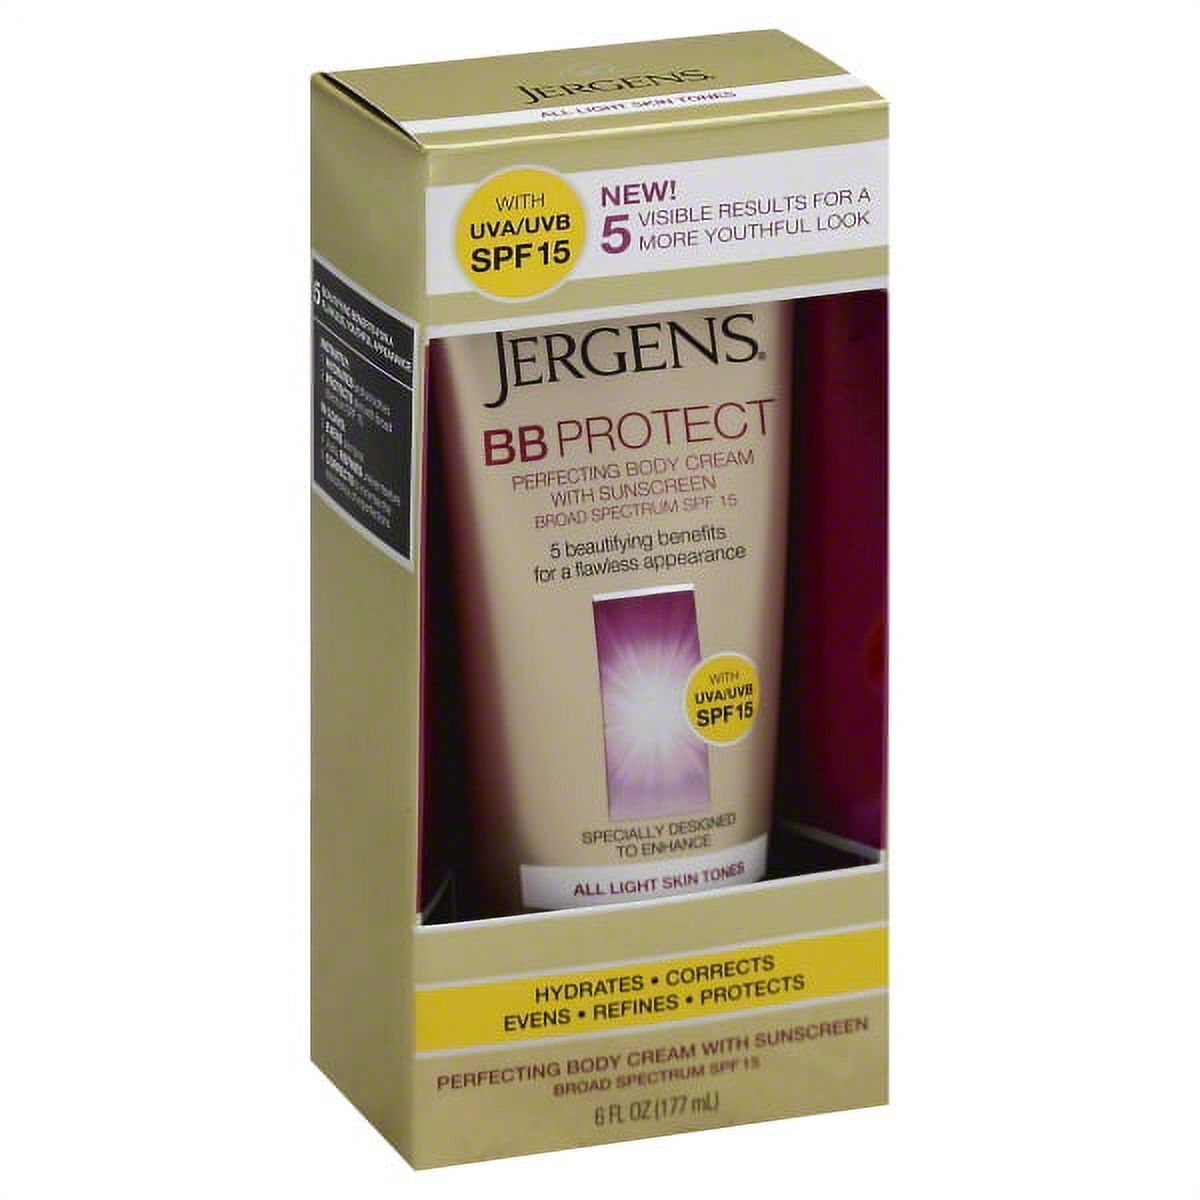 Jergens BB Protect Perfecting Body Cream with Sunscreen, All Light Skin Tones 6 oz - image 1 of 4